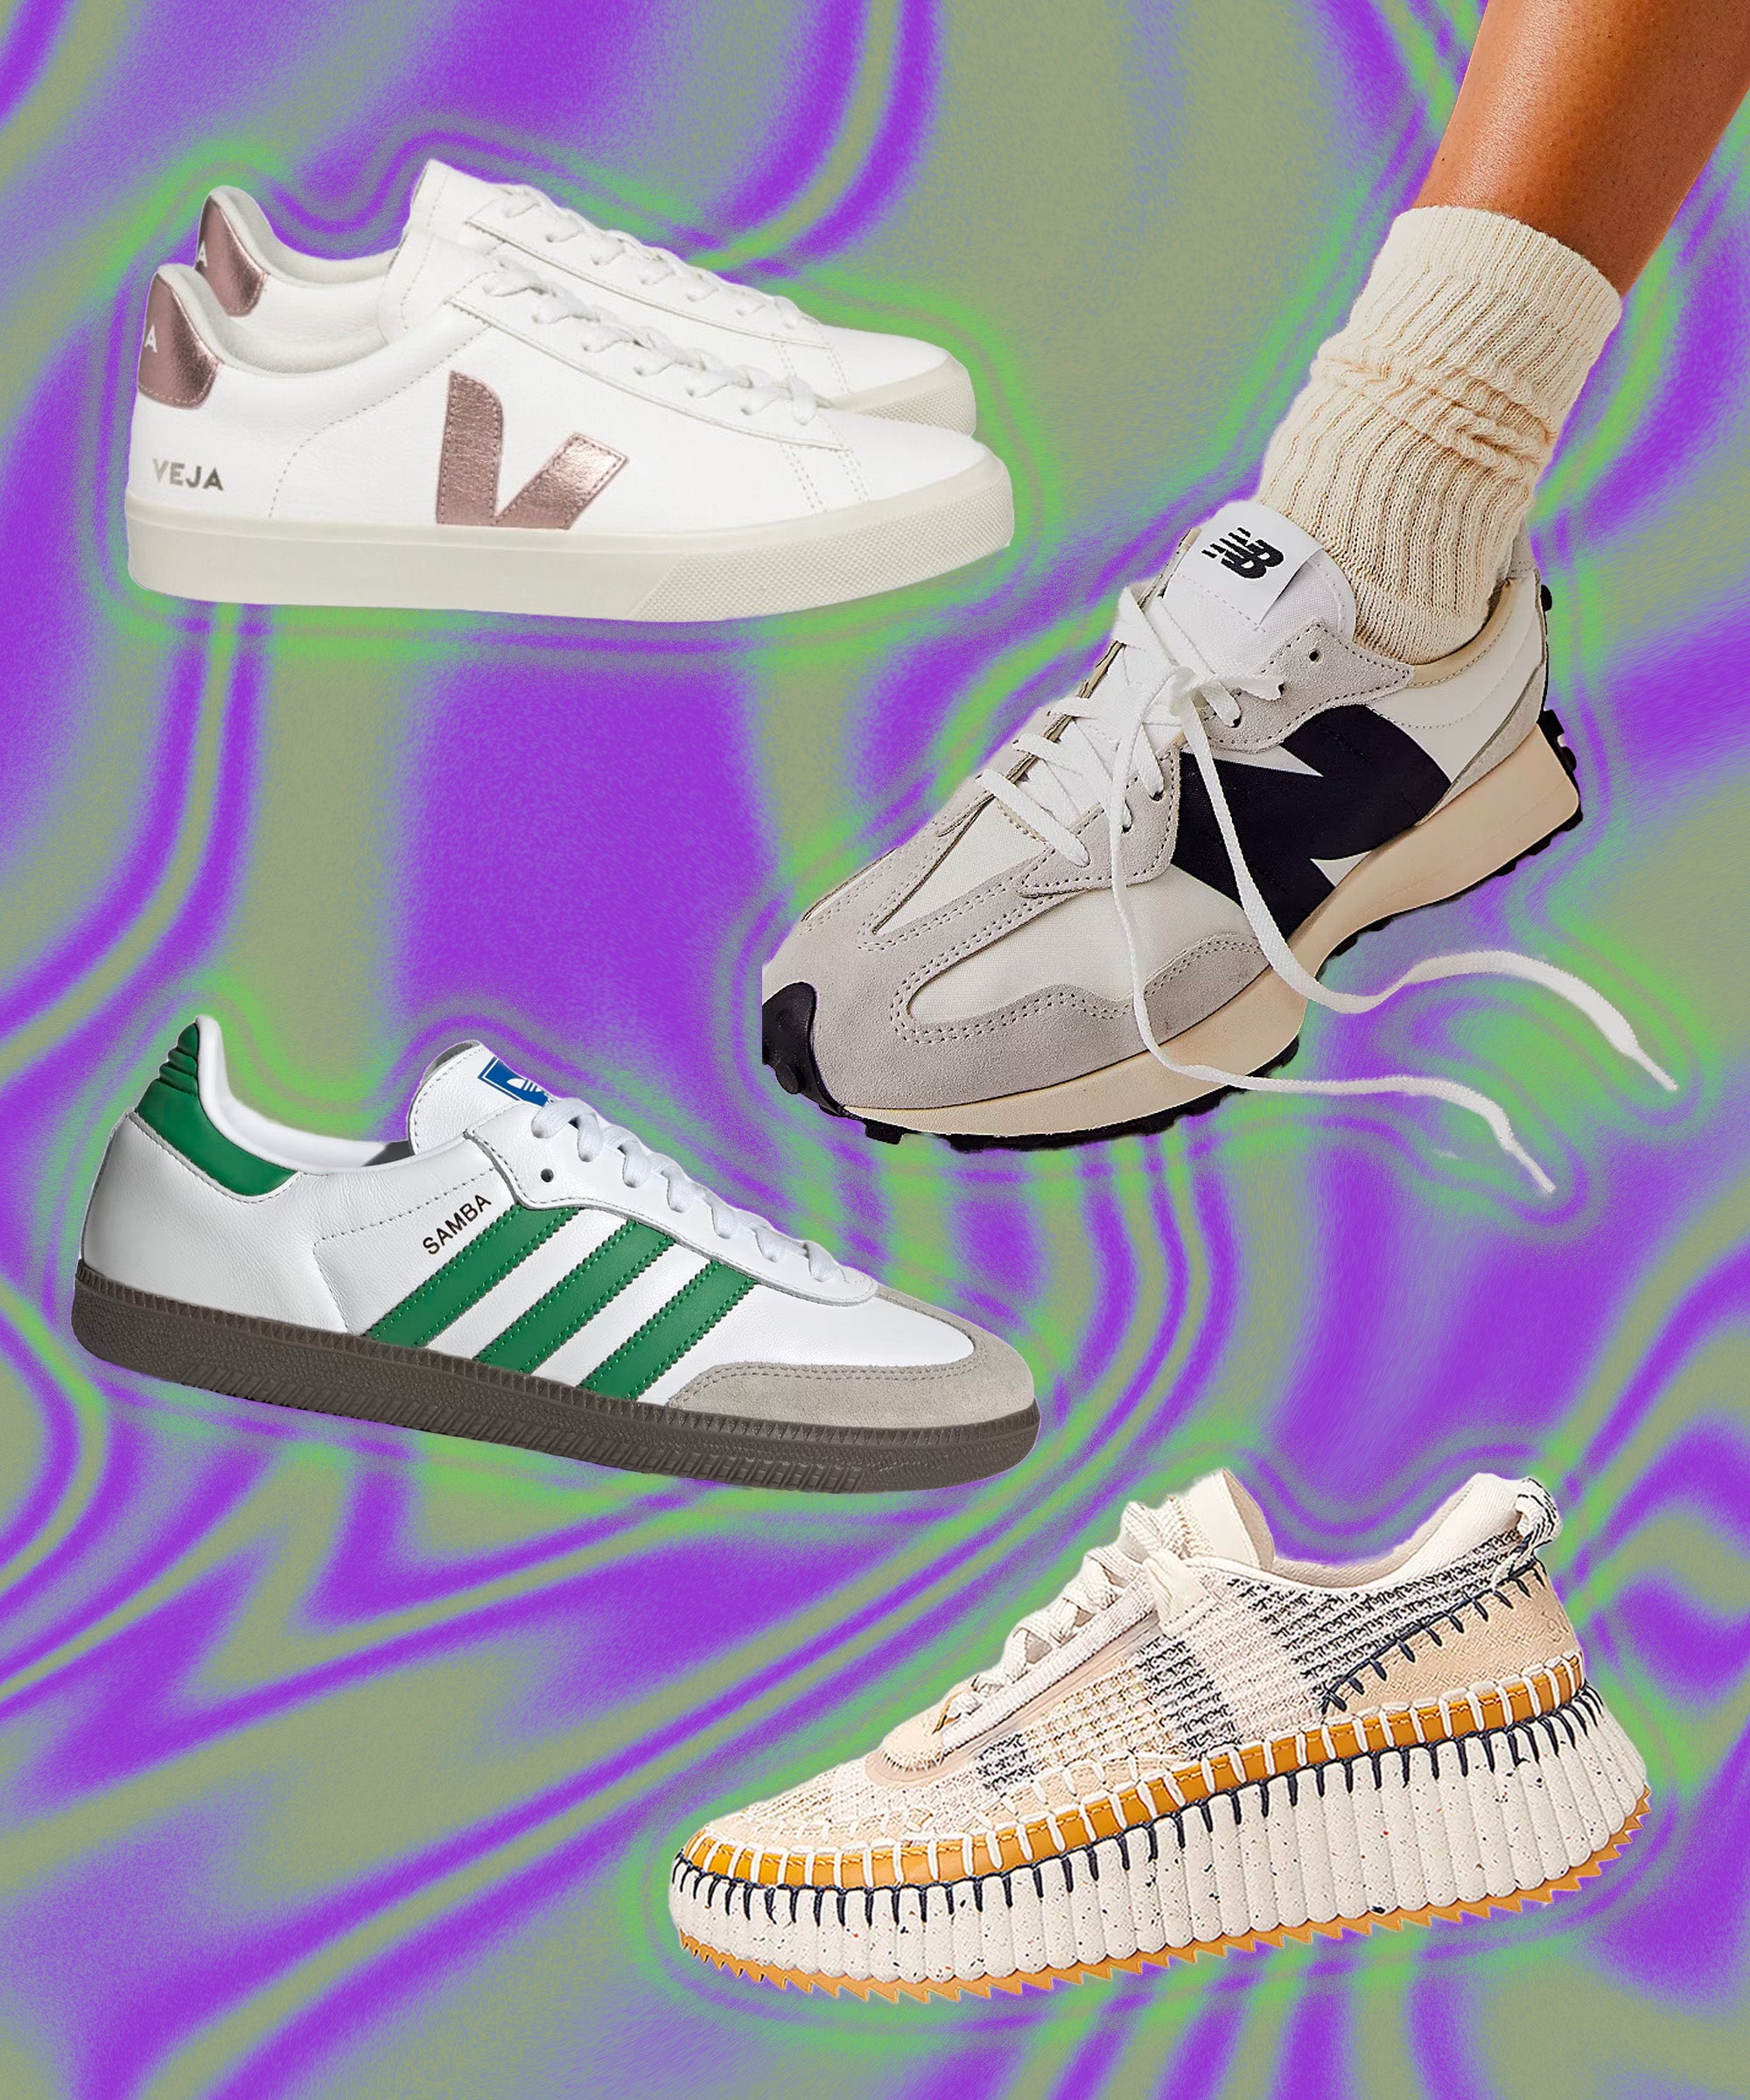 36 Best Sneakers for Women That Will Never Go Out of Style | Vogue